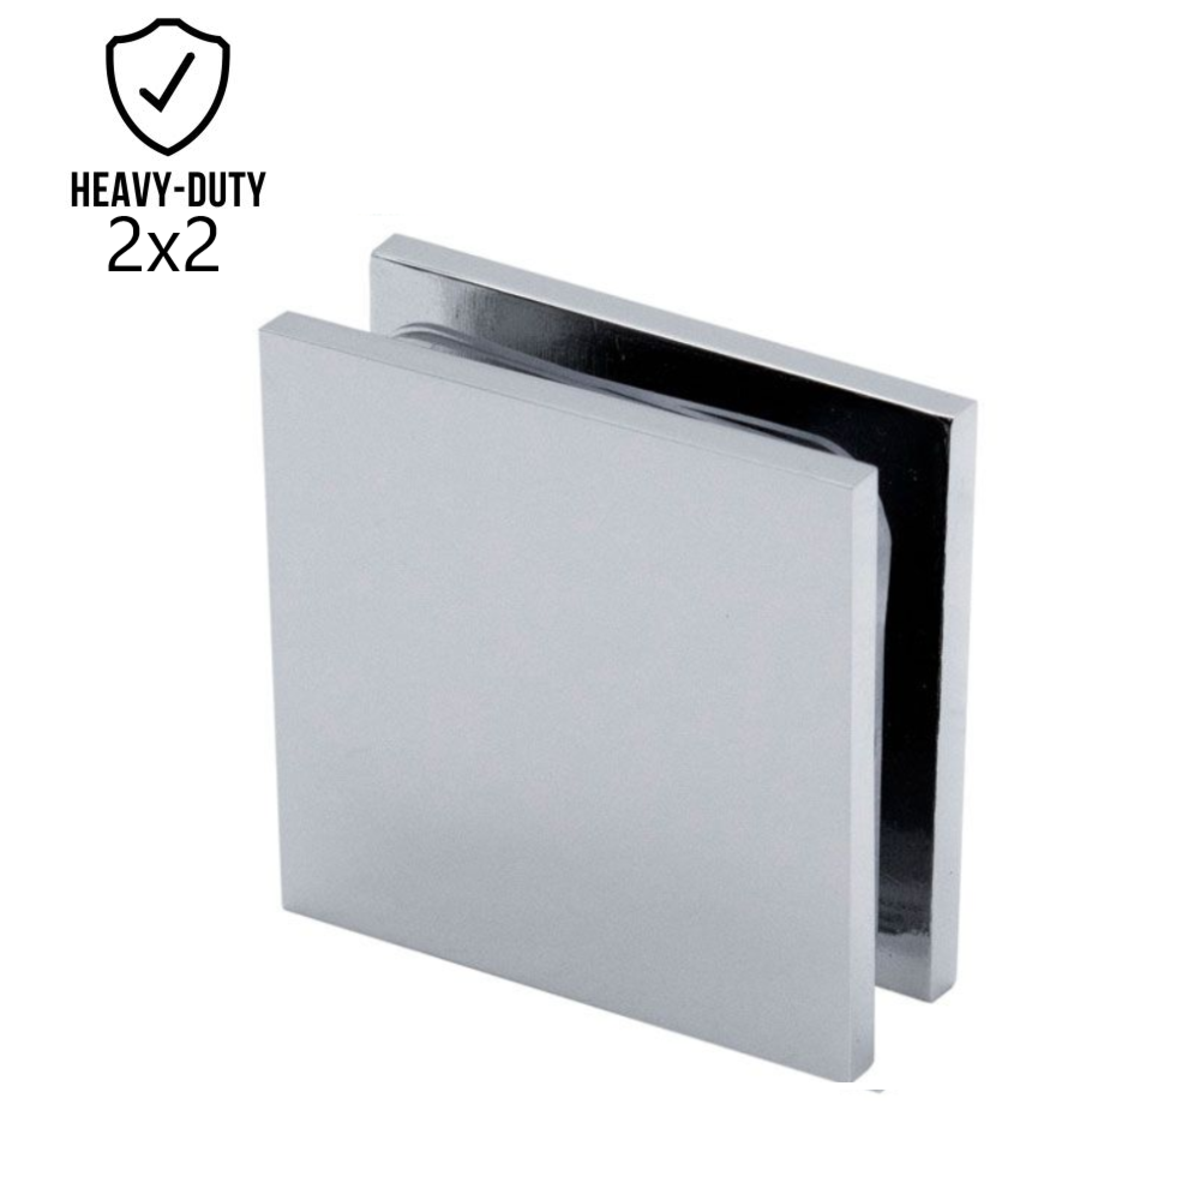 2" x 2" Heavy Duty Wall to Glass Square Edges Glass Clamp